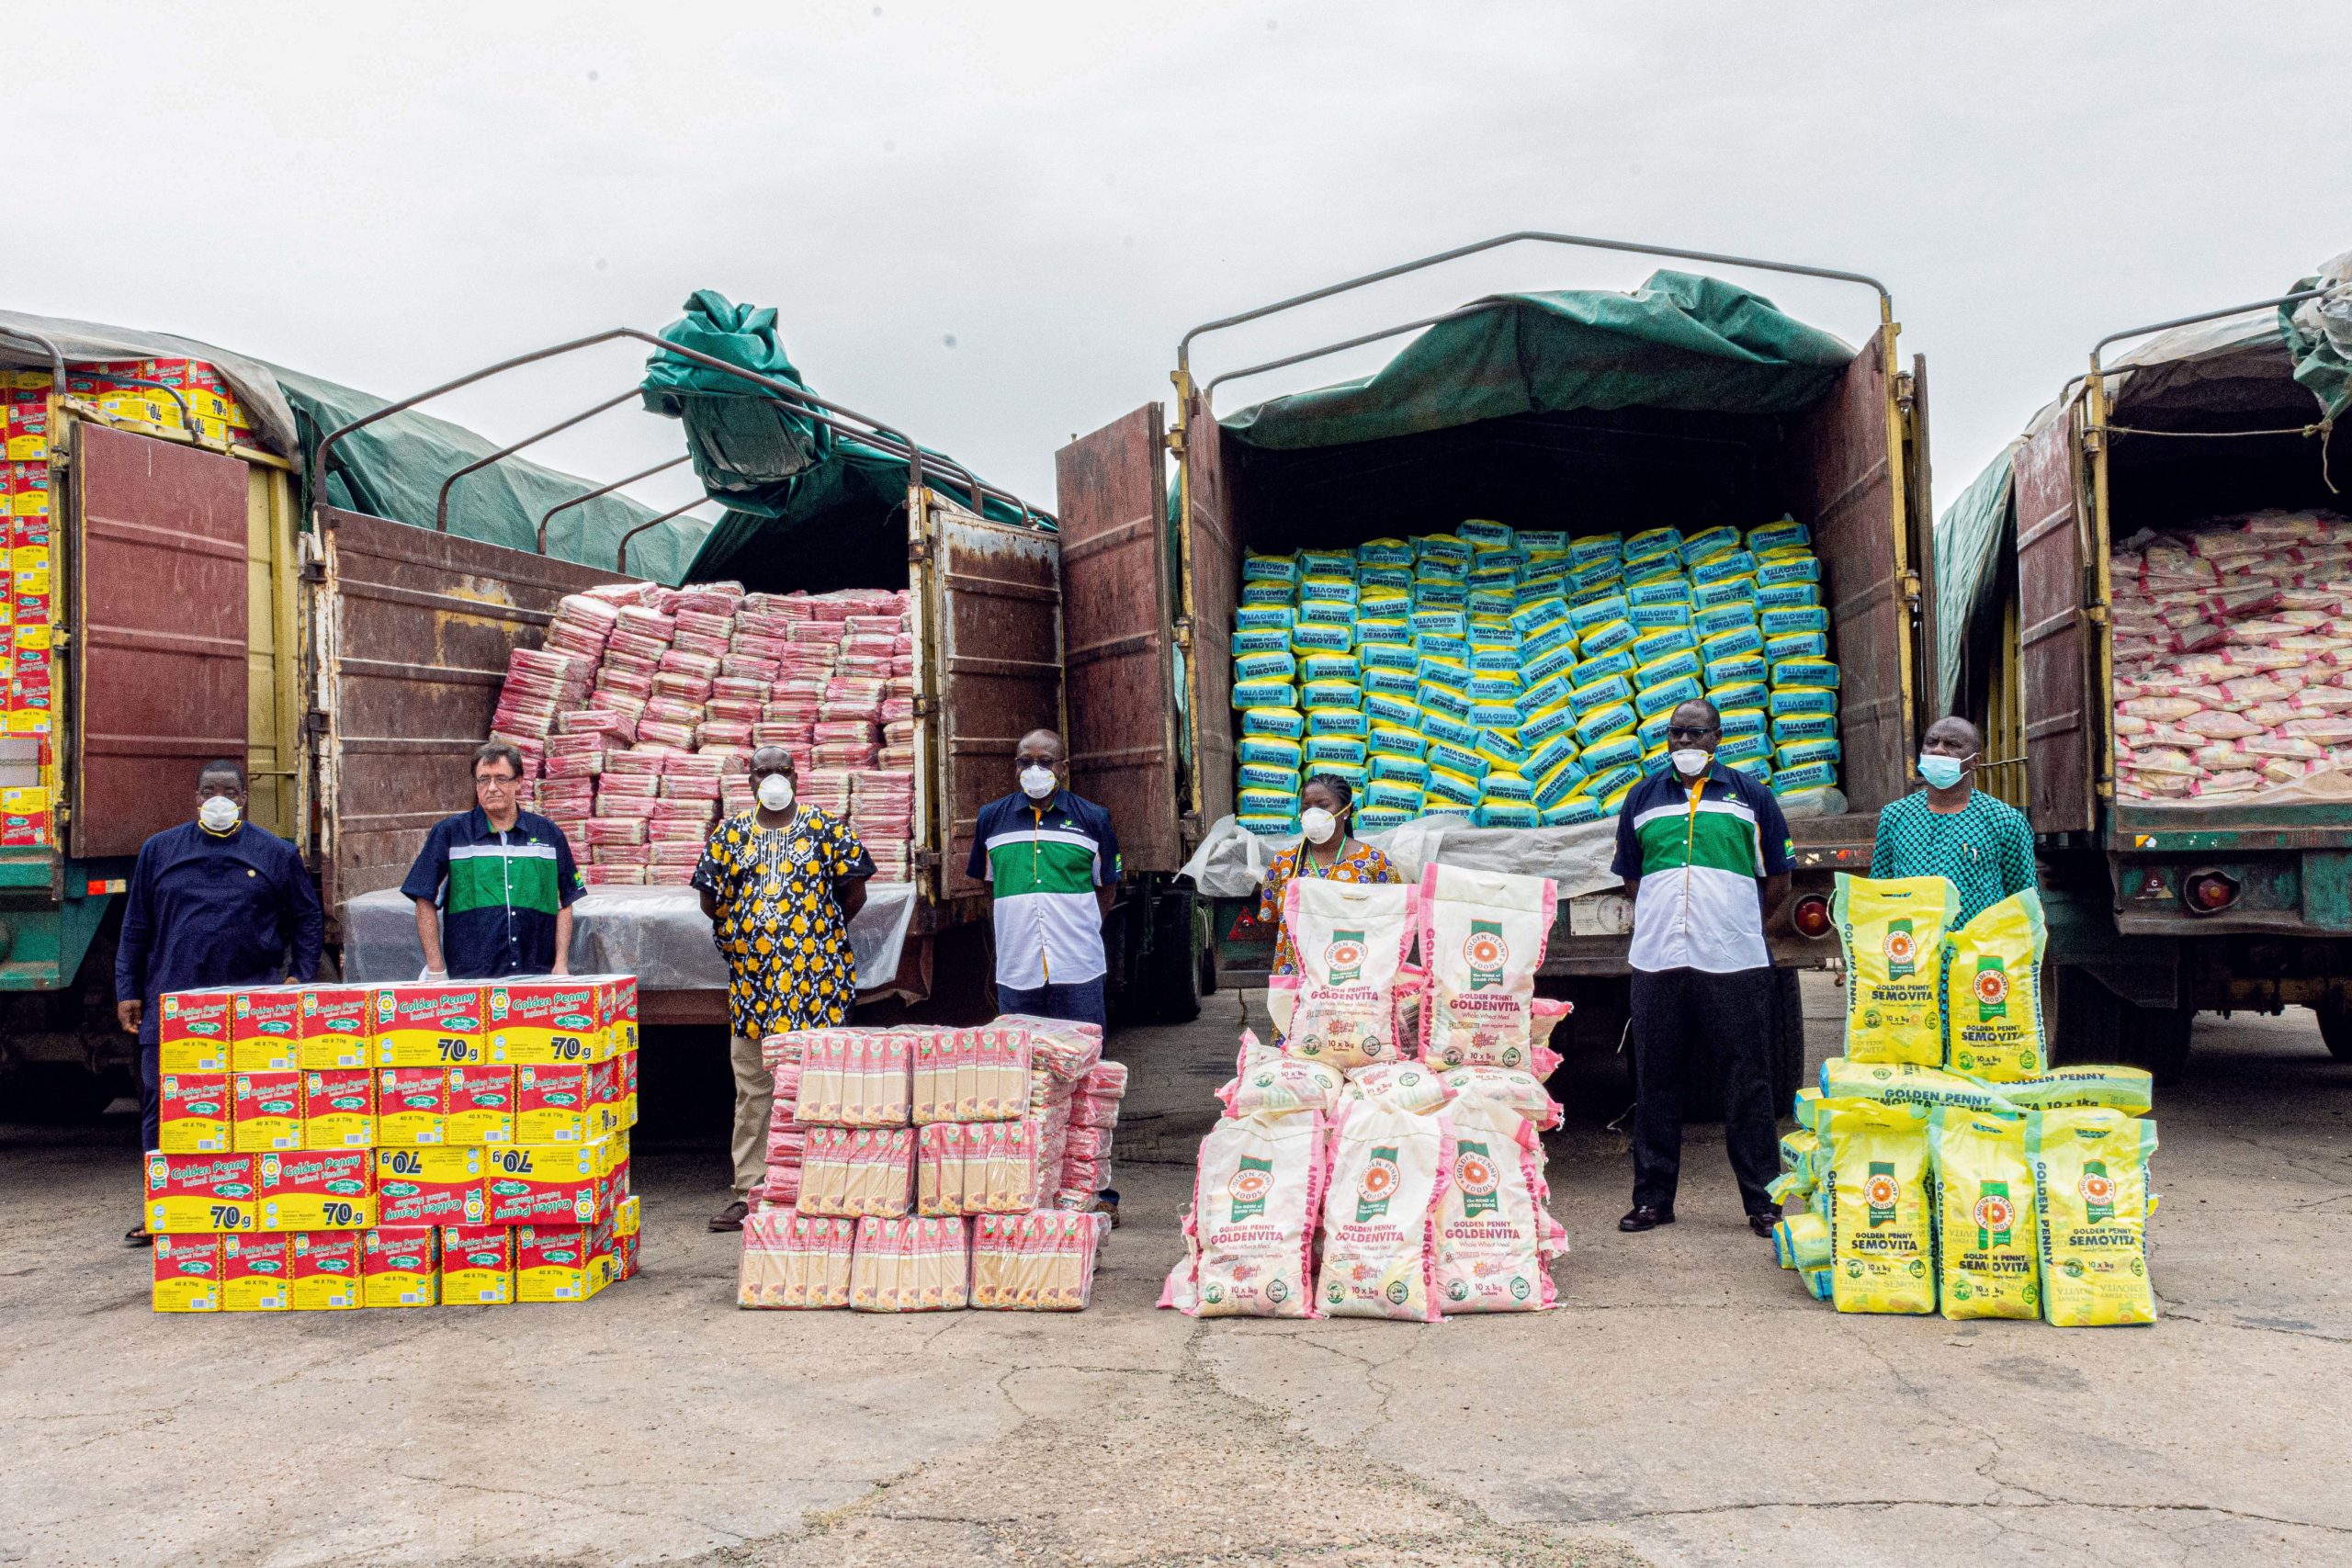 Golden Penny Donates Food Products Across The Country